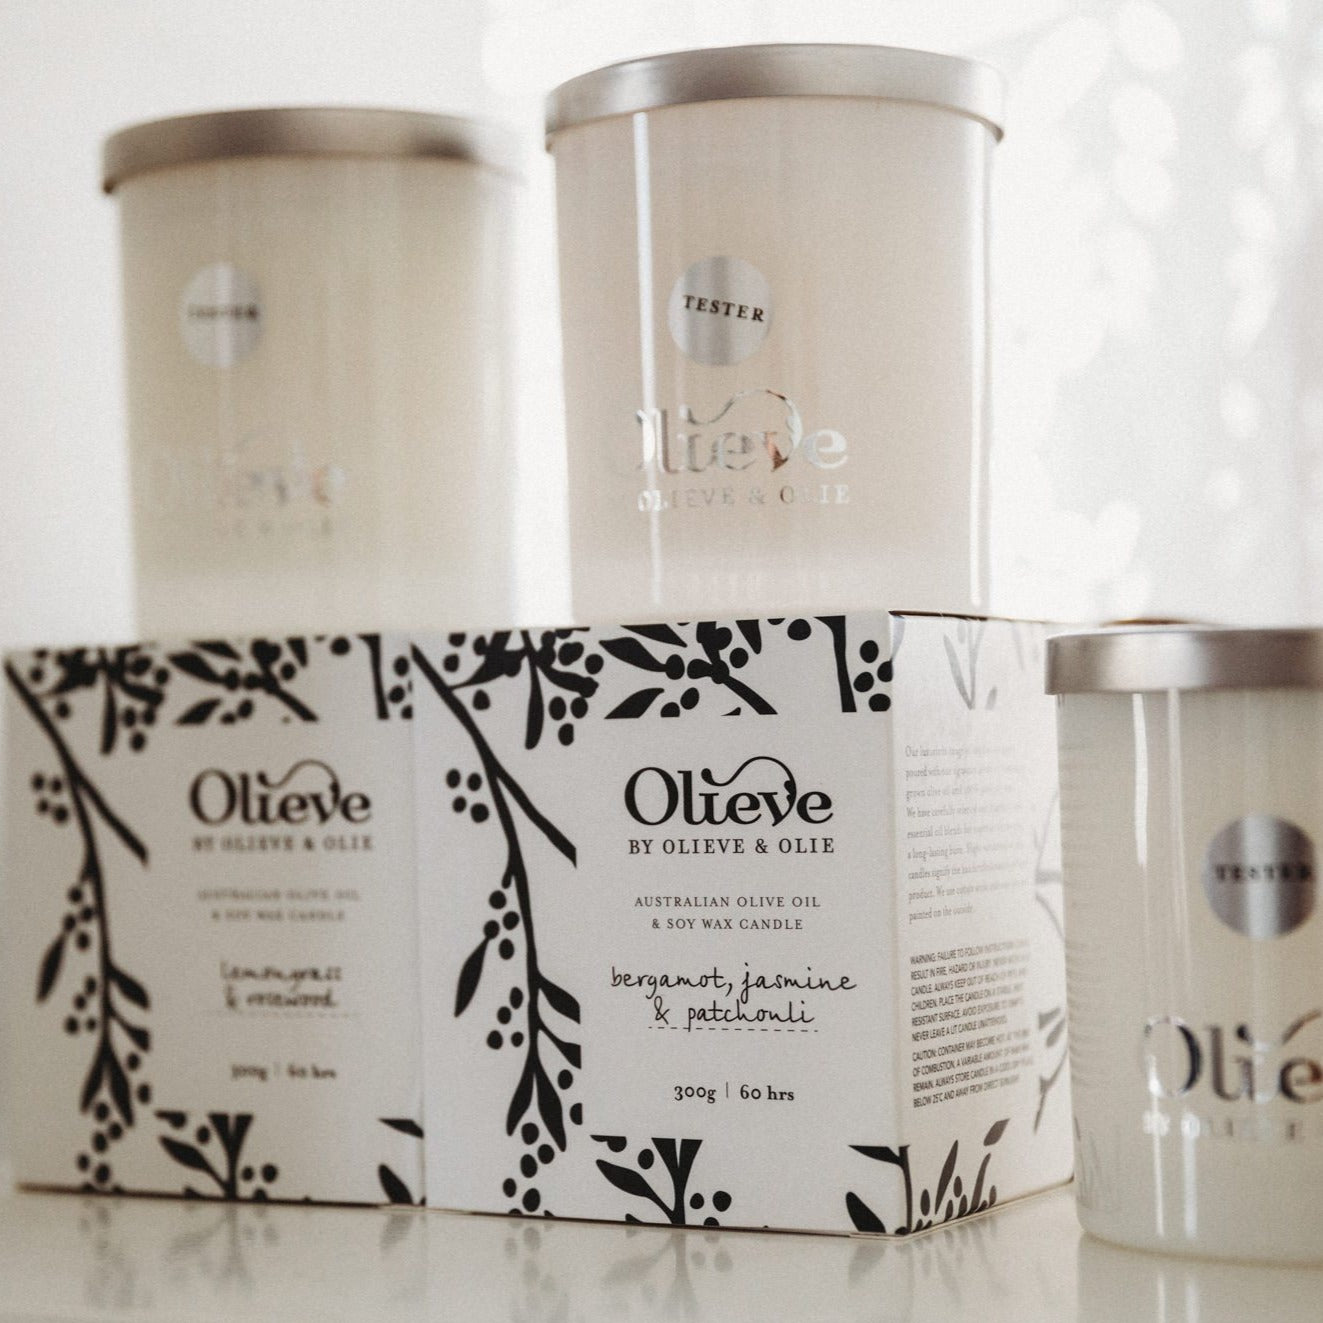 Olieve - olive oil & soy wax candle